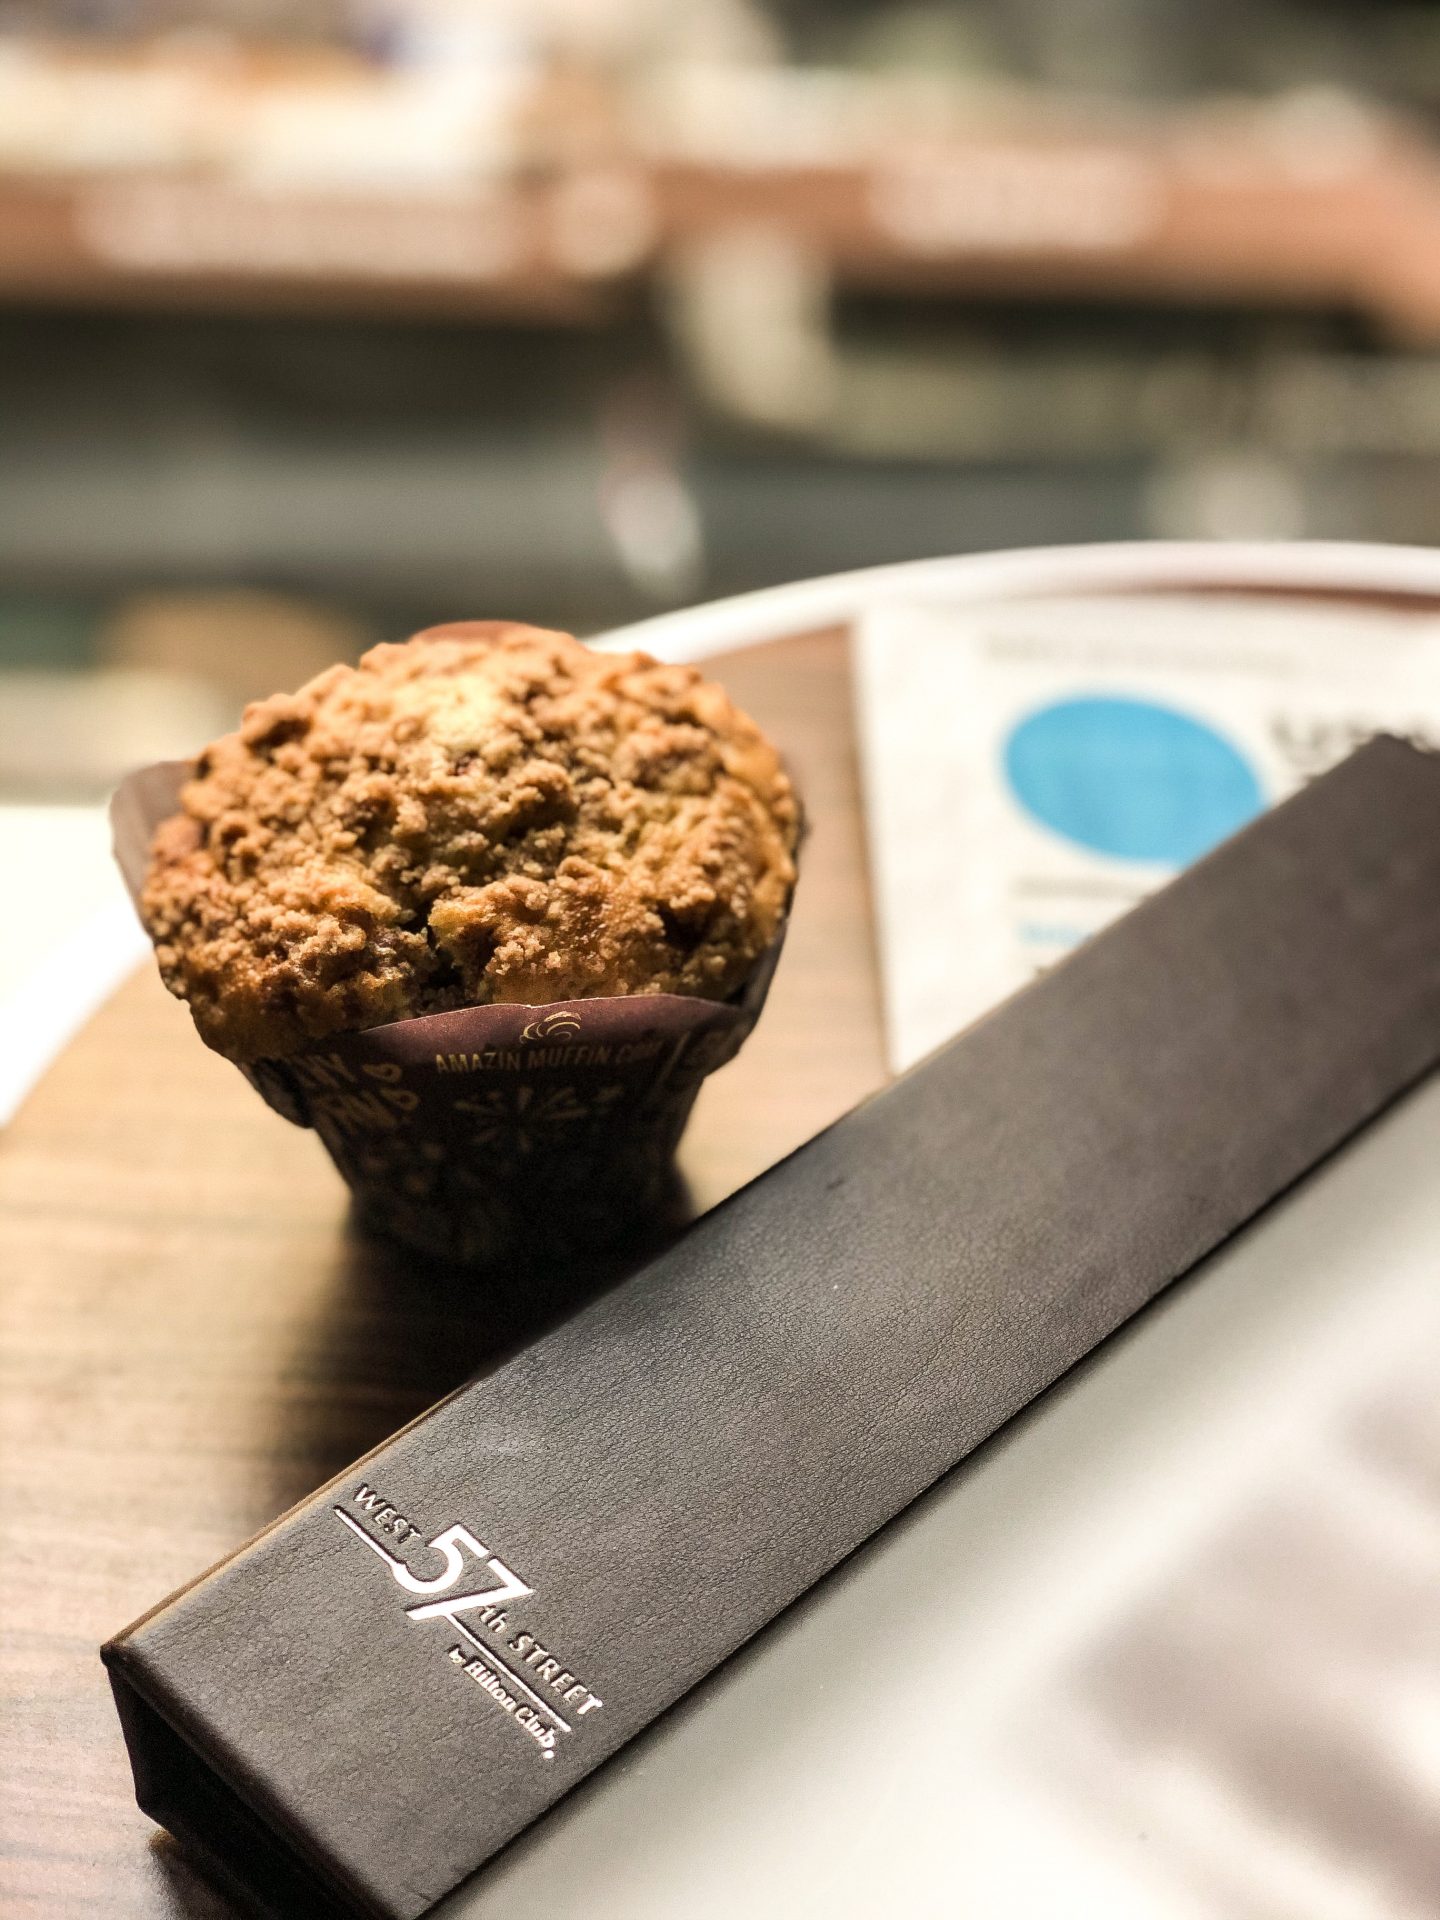 Newspaper and muffin at West on 57th Street | tipping at hotels